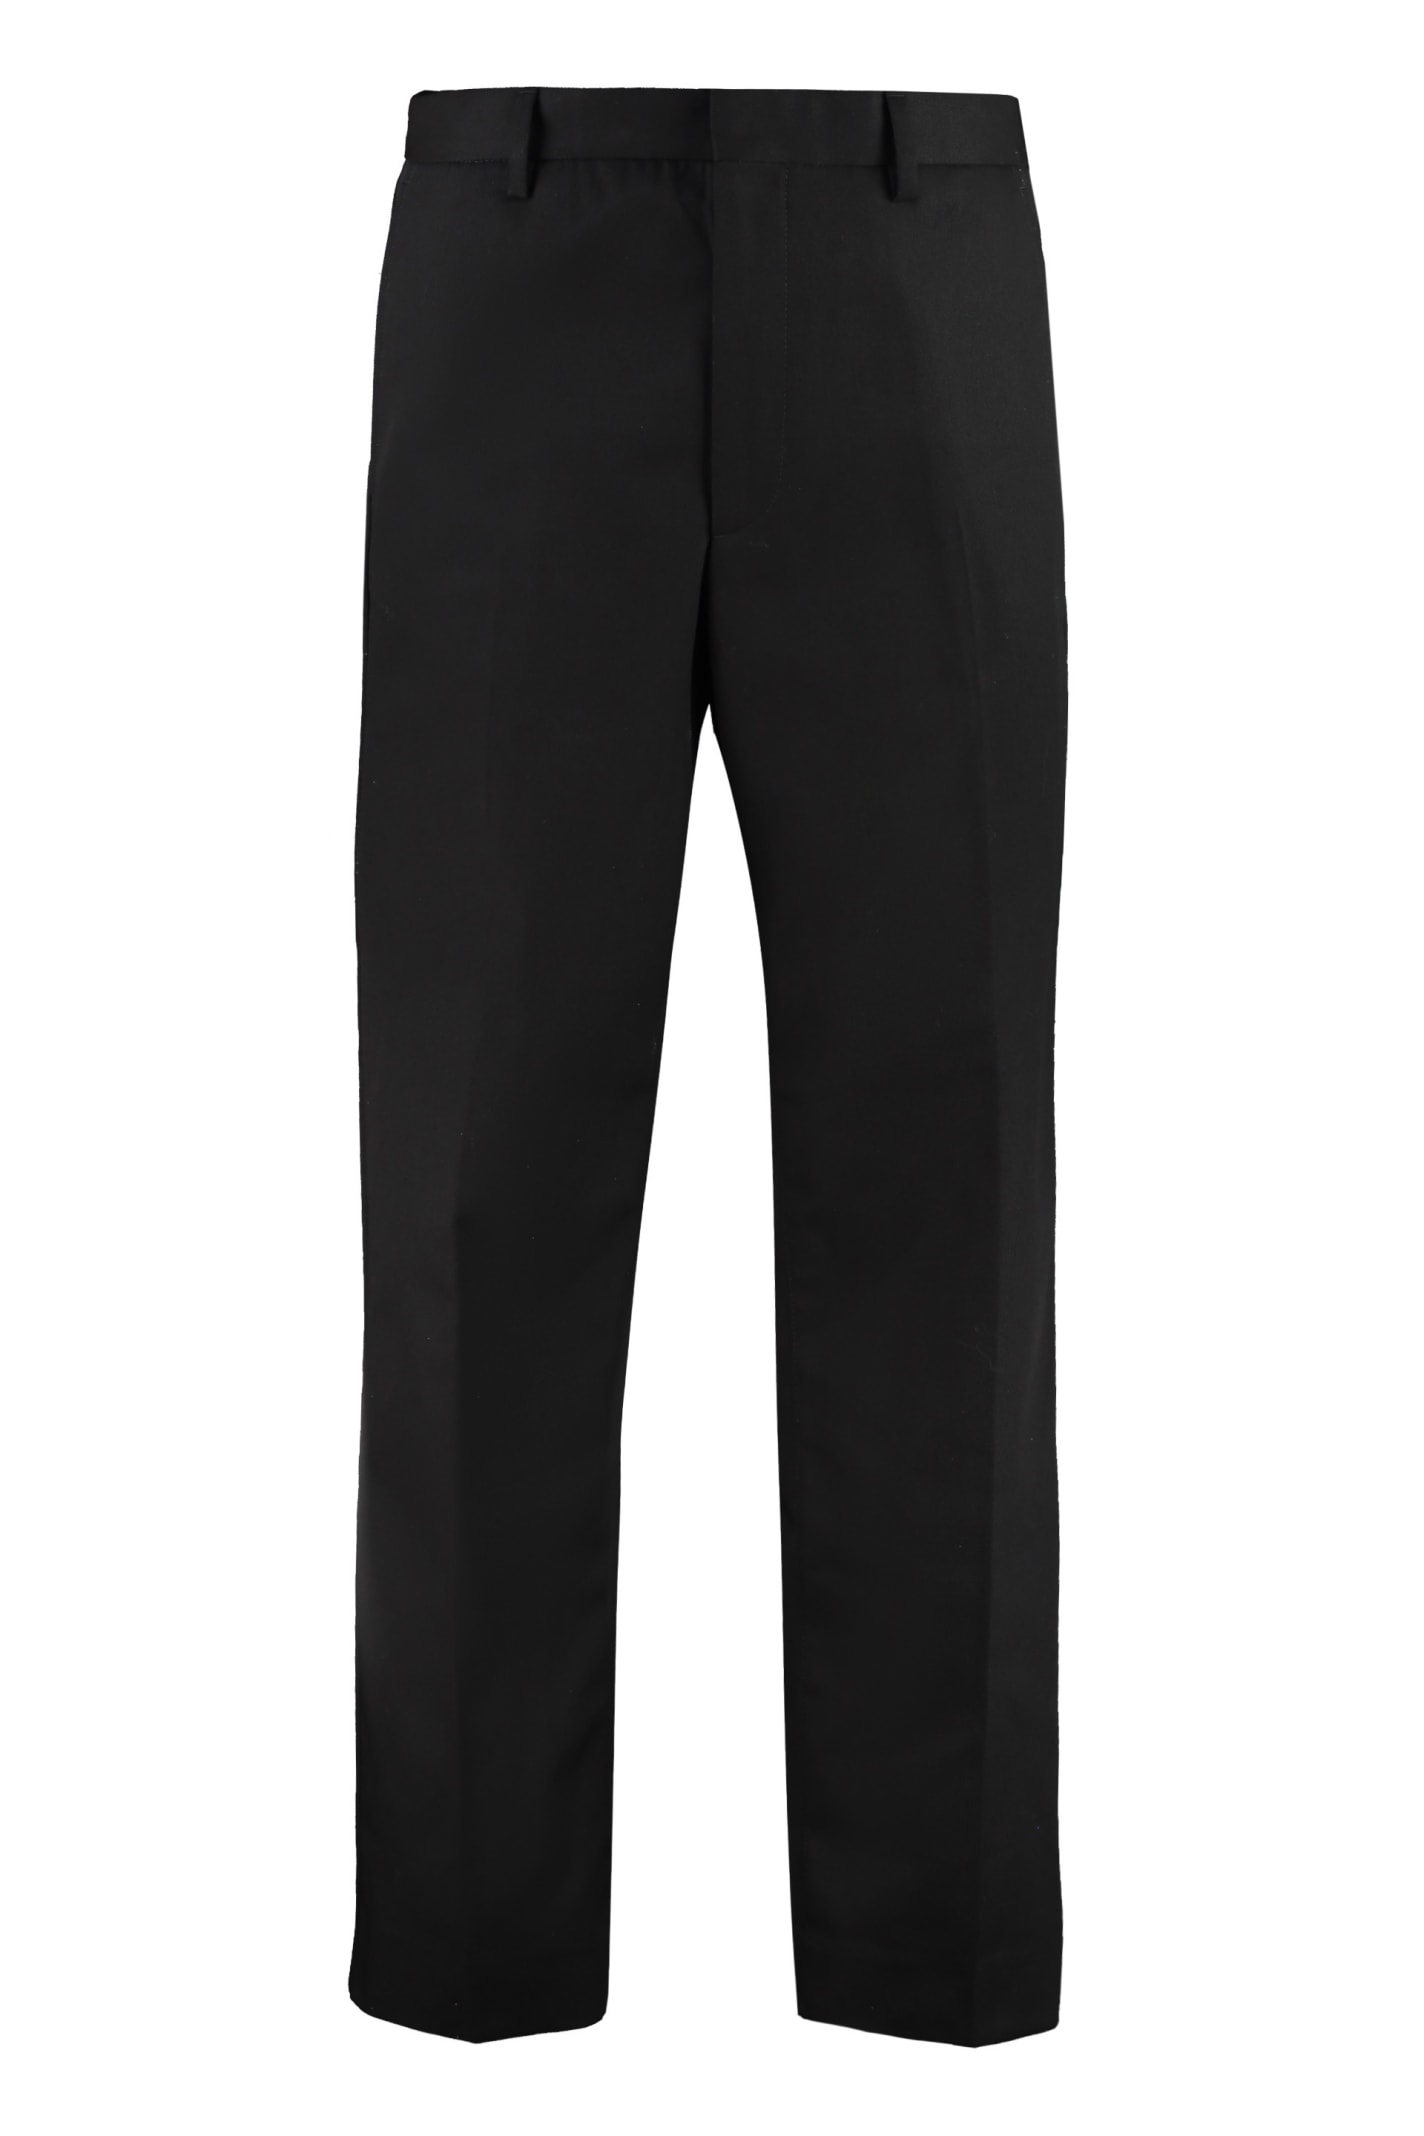 Acne Studios Cotton Blend Chino Trousers